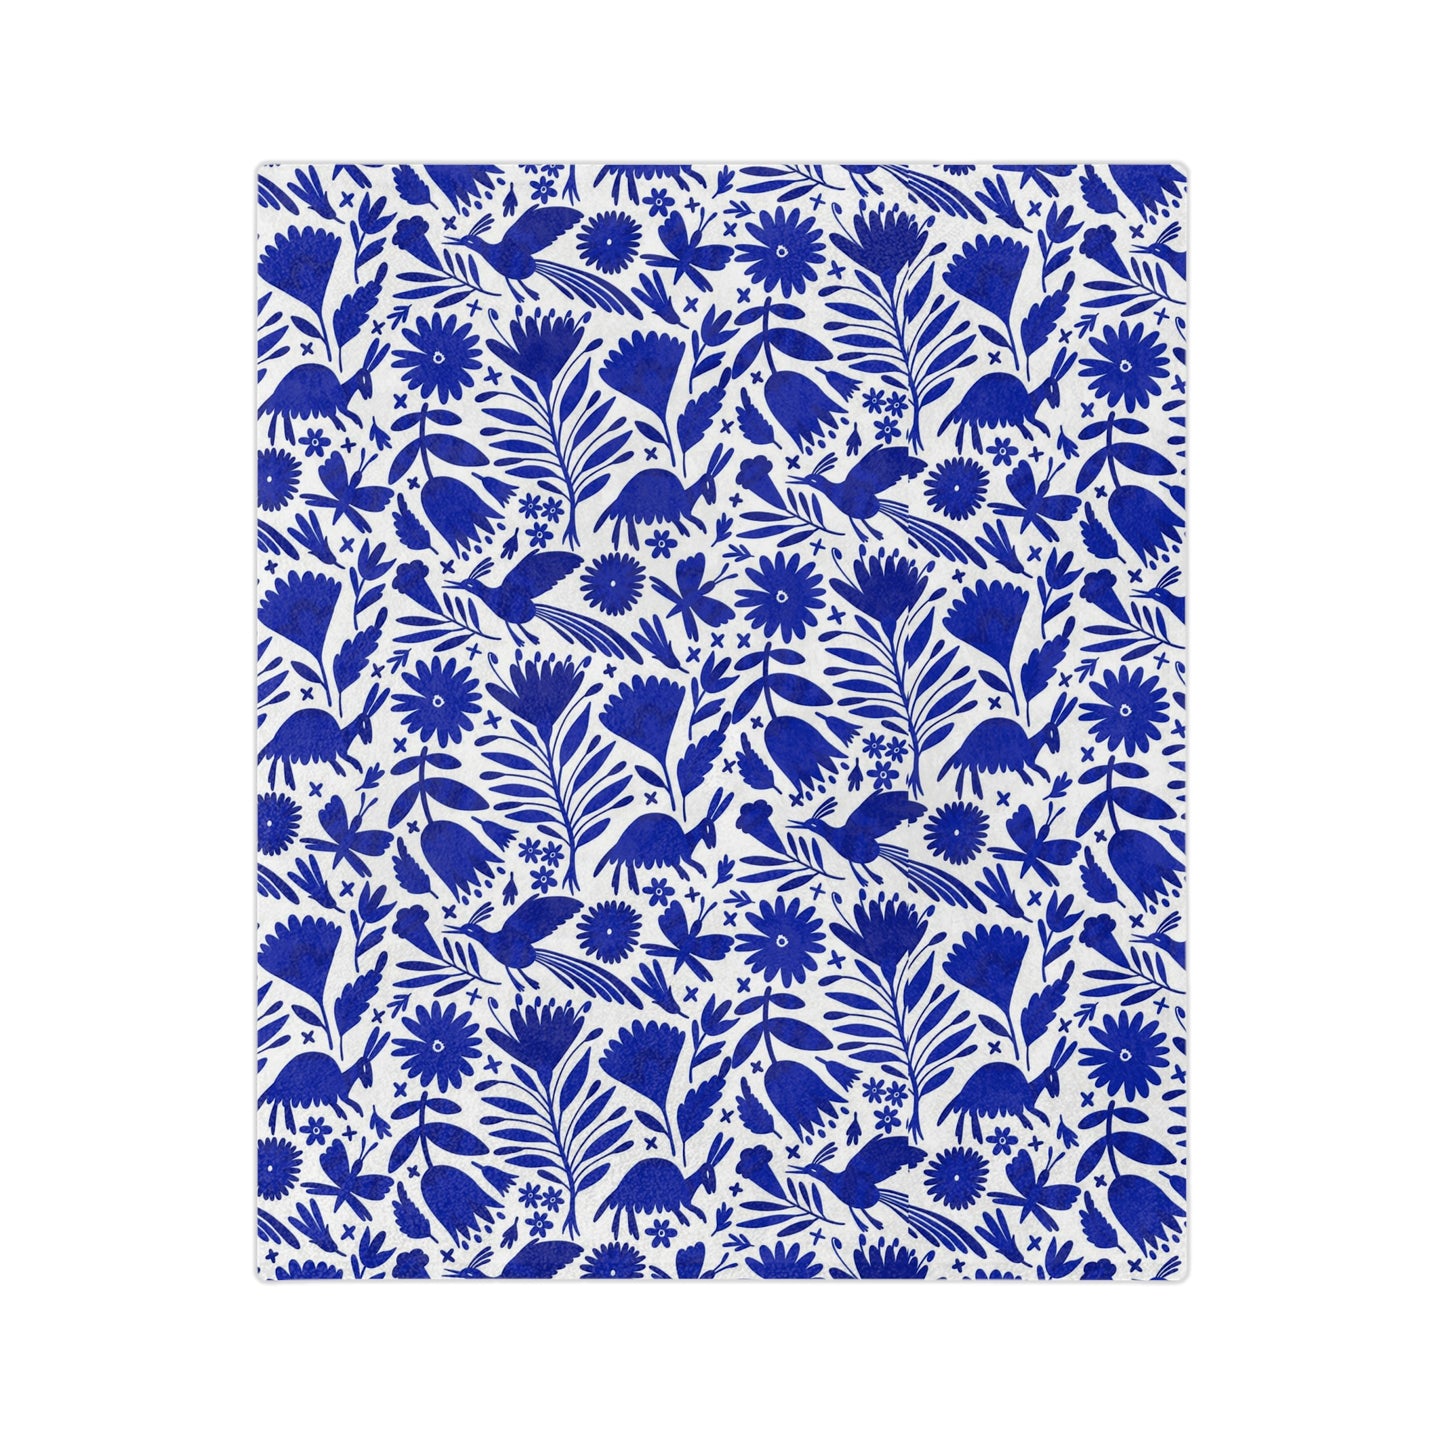 Blue and white Otomi soft blanket for Mexican home decor